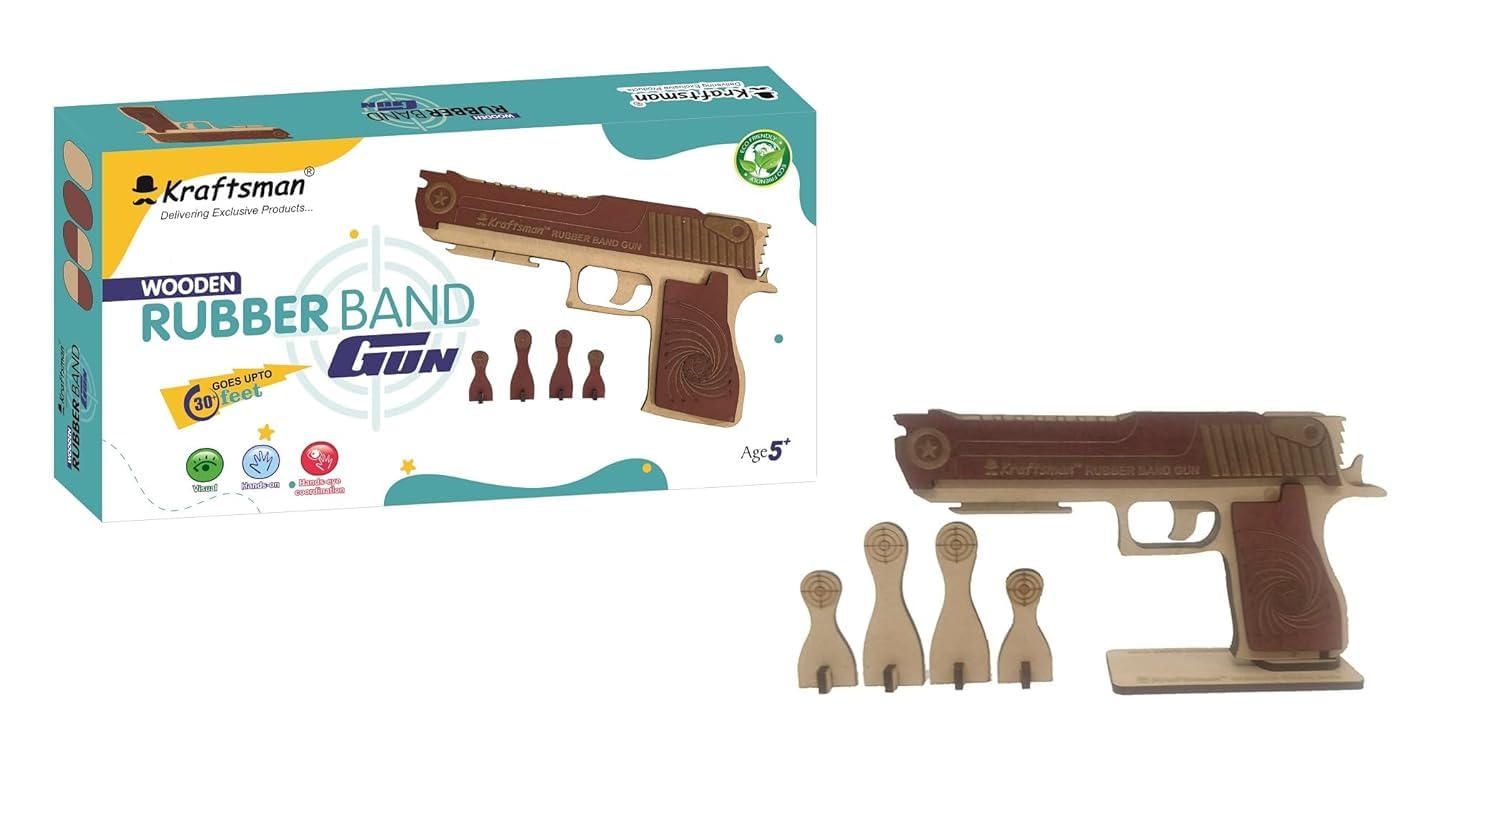 Braintastic Wooden Semi-Automatic Rubber Band Shooting Gun Toys with 5 Rapid Fire Shots for Kids (Brown Beige)